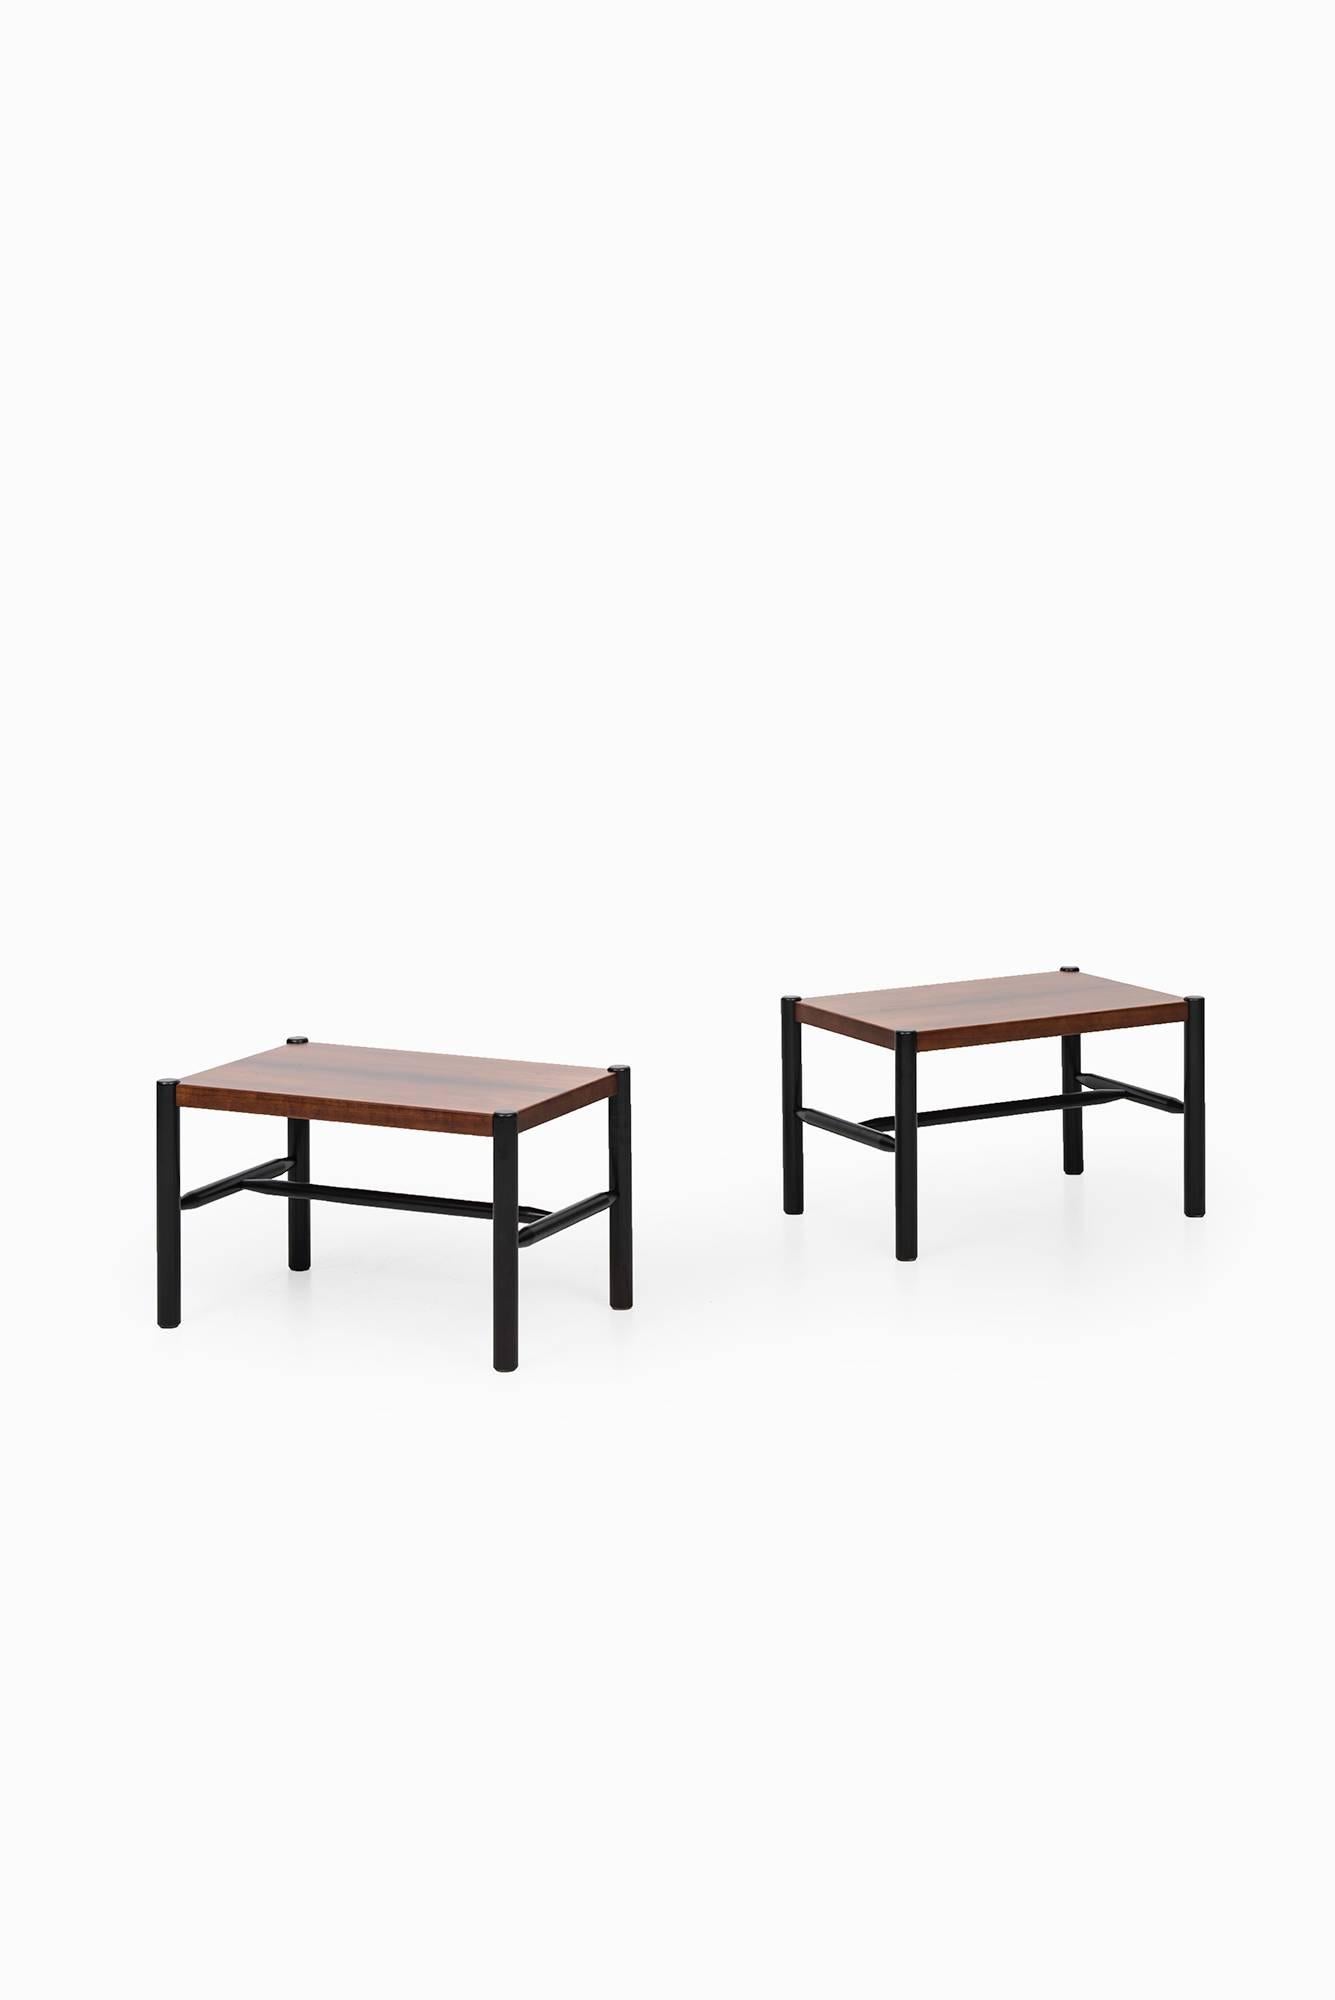 Rare pair of side tables designed by Arne Norell. Produced by Arne Norell AB in Aneby, Sweden. Matching coffee table is also available. 